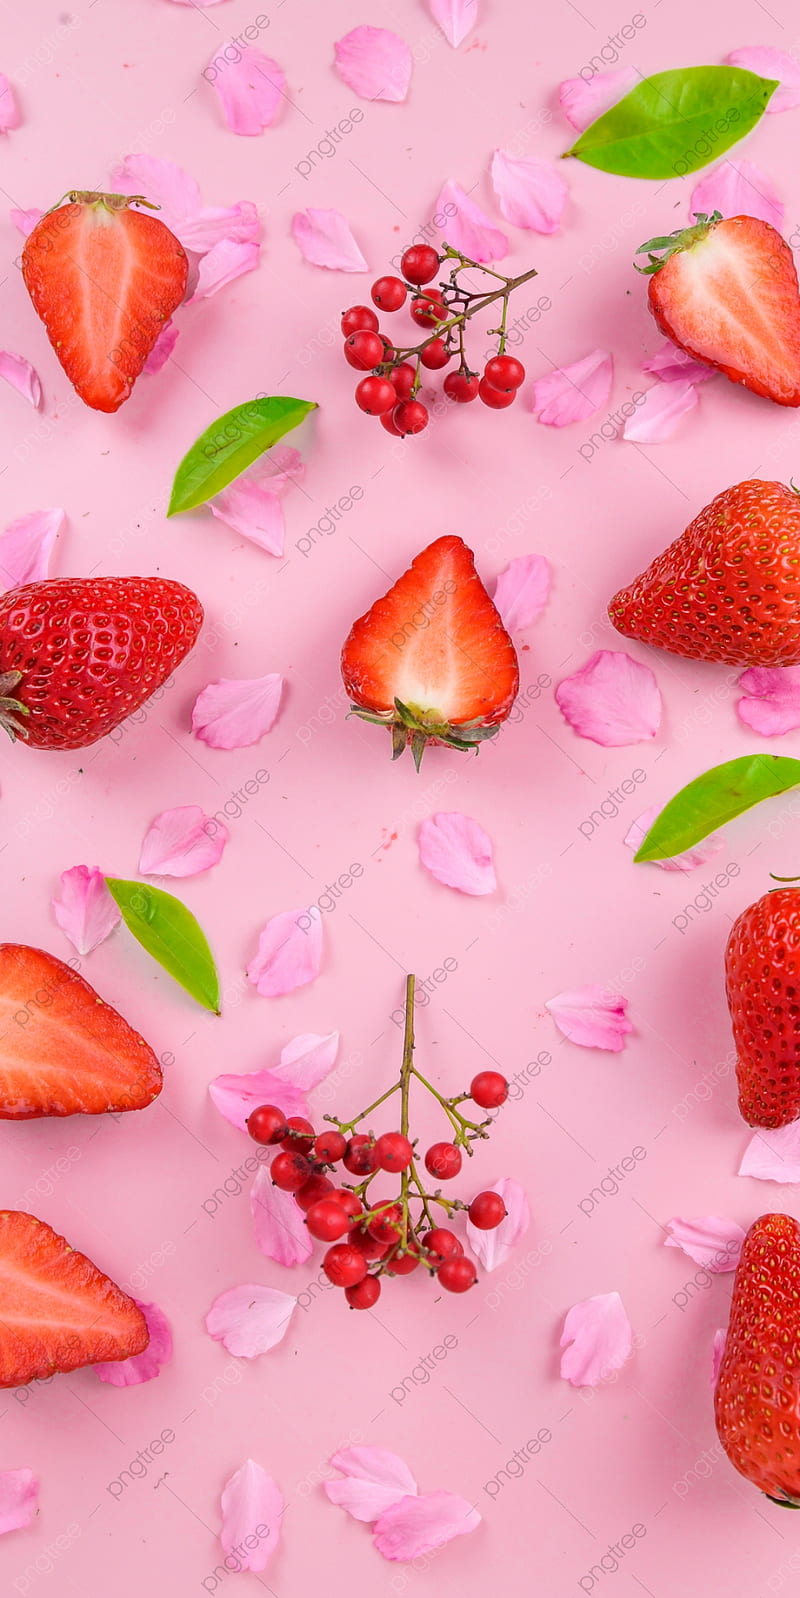 Cute strawberry wallpaper stock vector Illustration of food  87564290